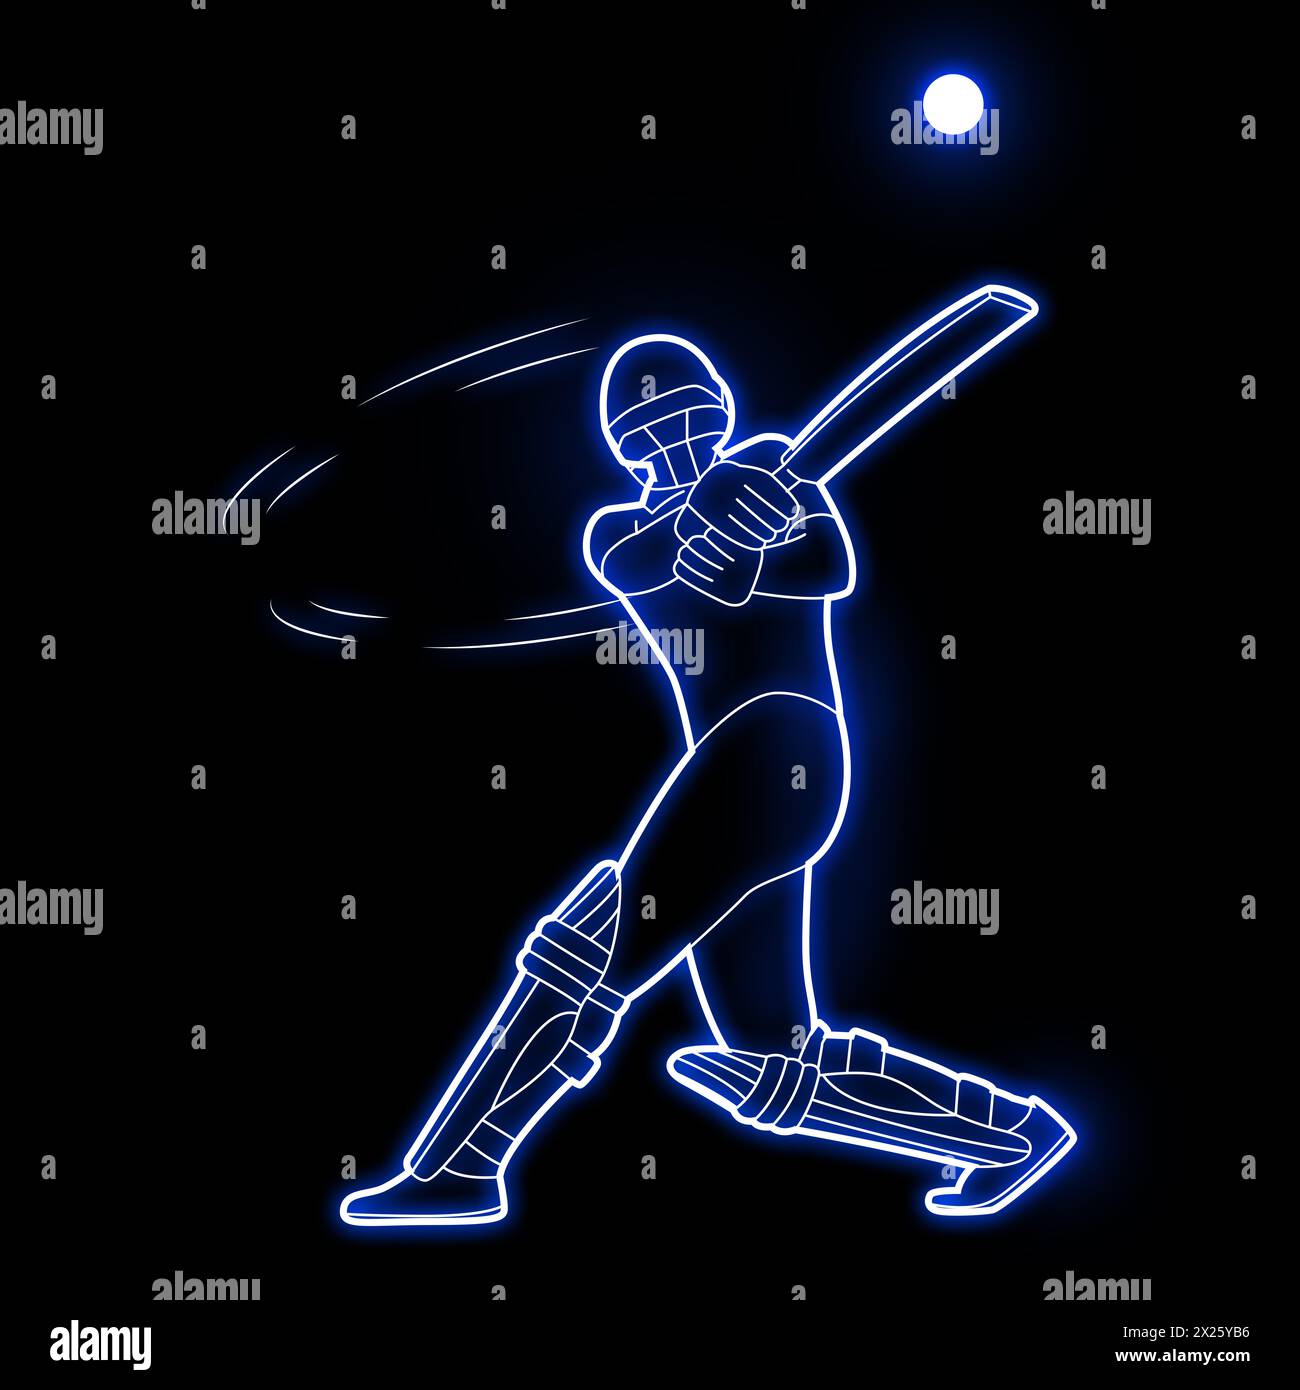 Cricket player neon vector art green, blue, red. Cricket batsman neon art. Cricket Batsman, Neon light effect, full black background. Stock Photo